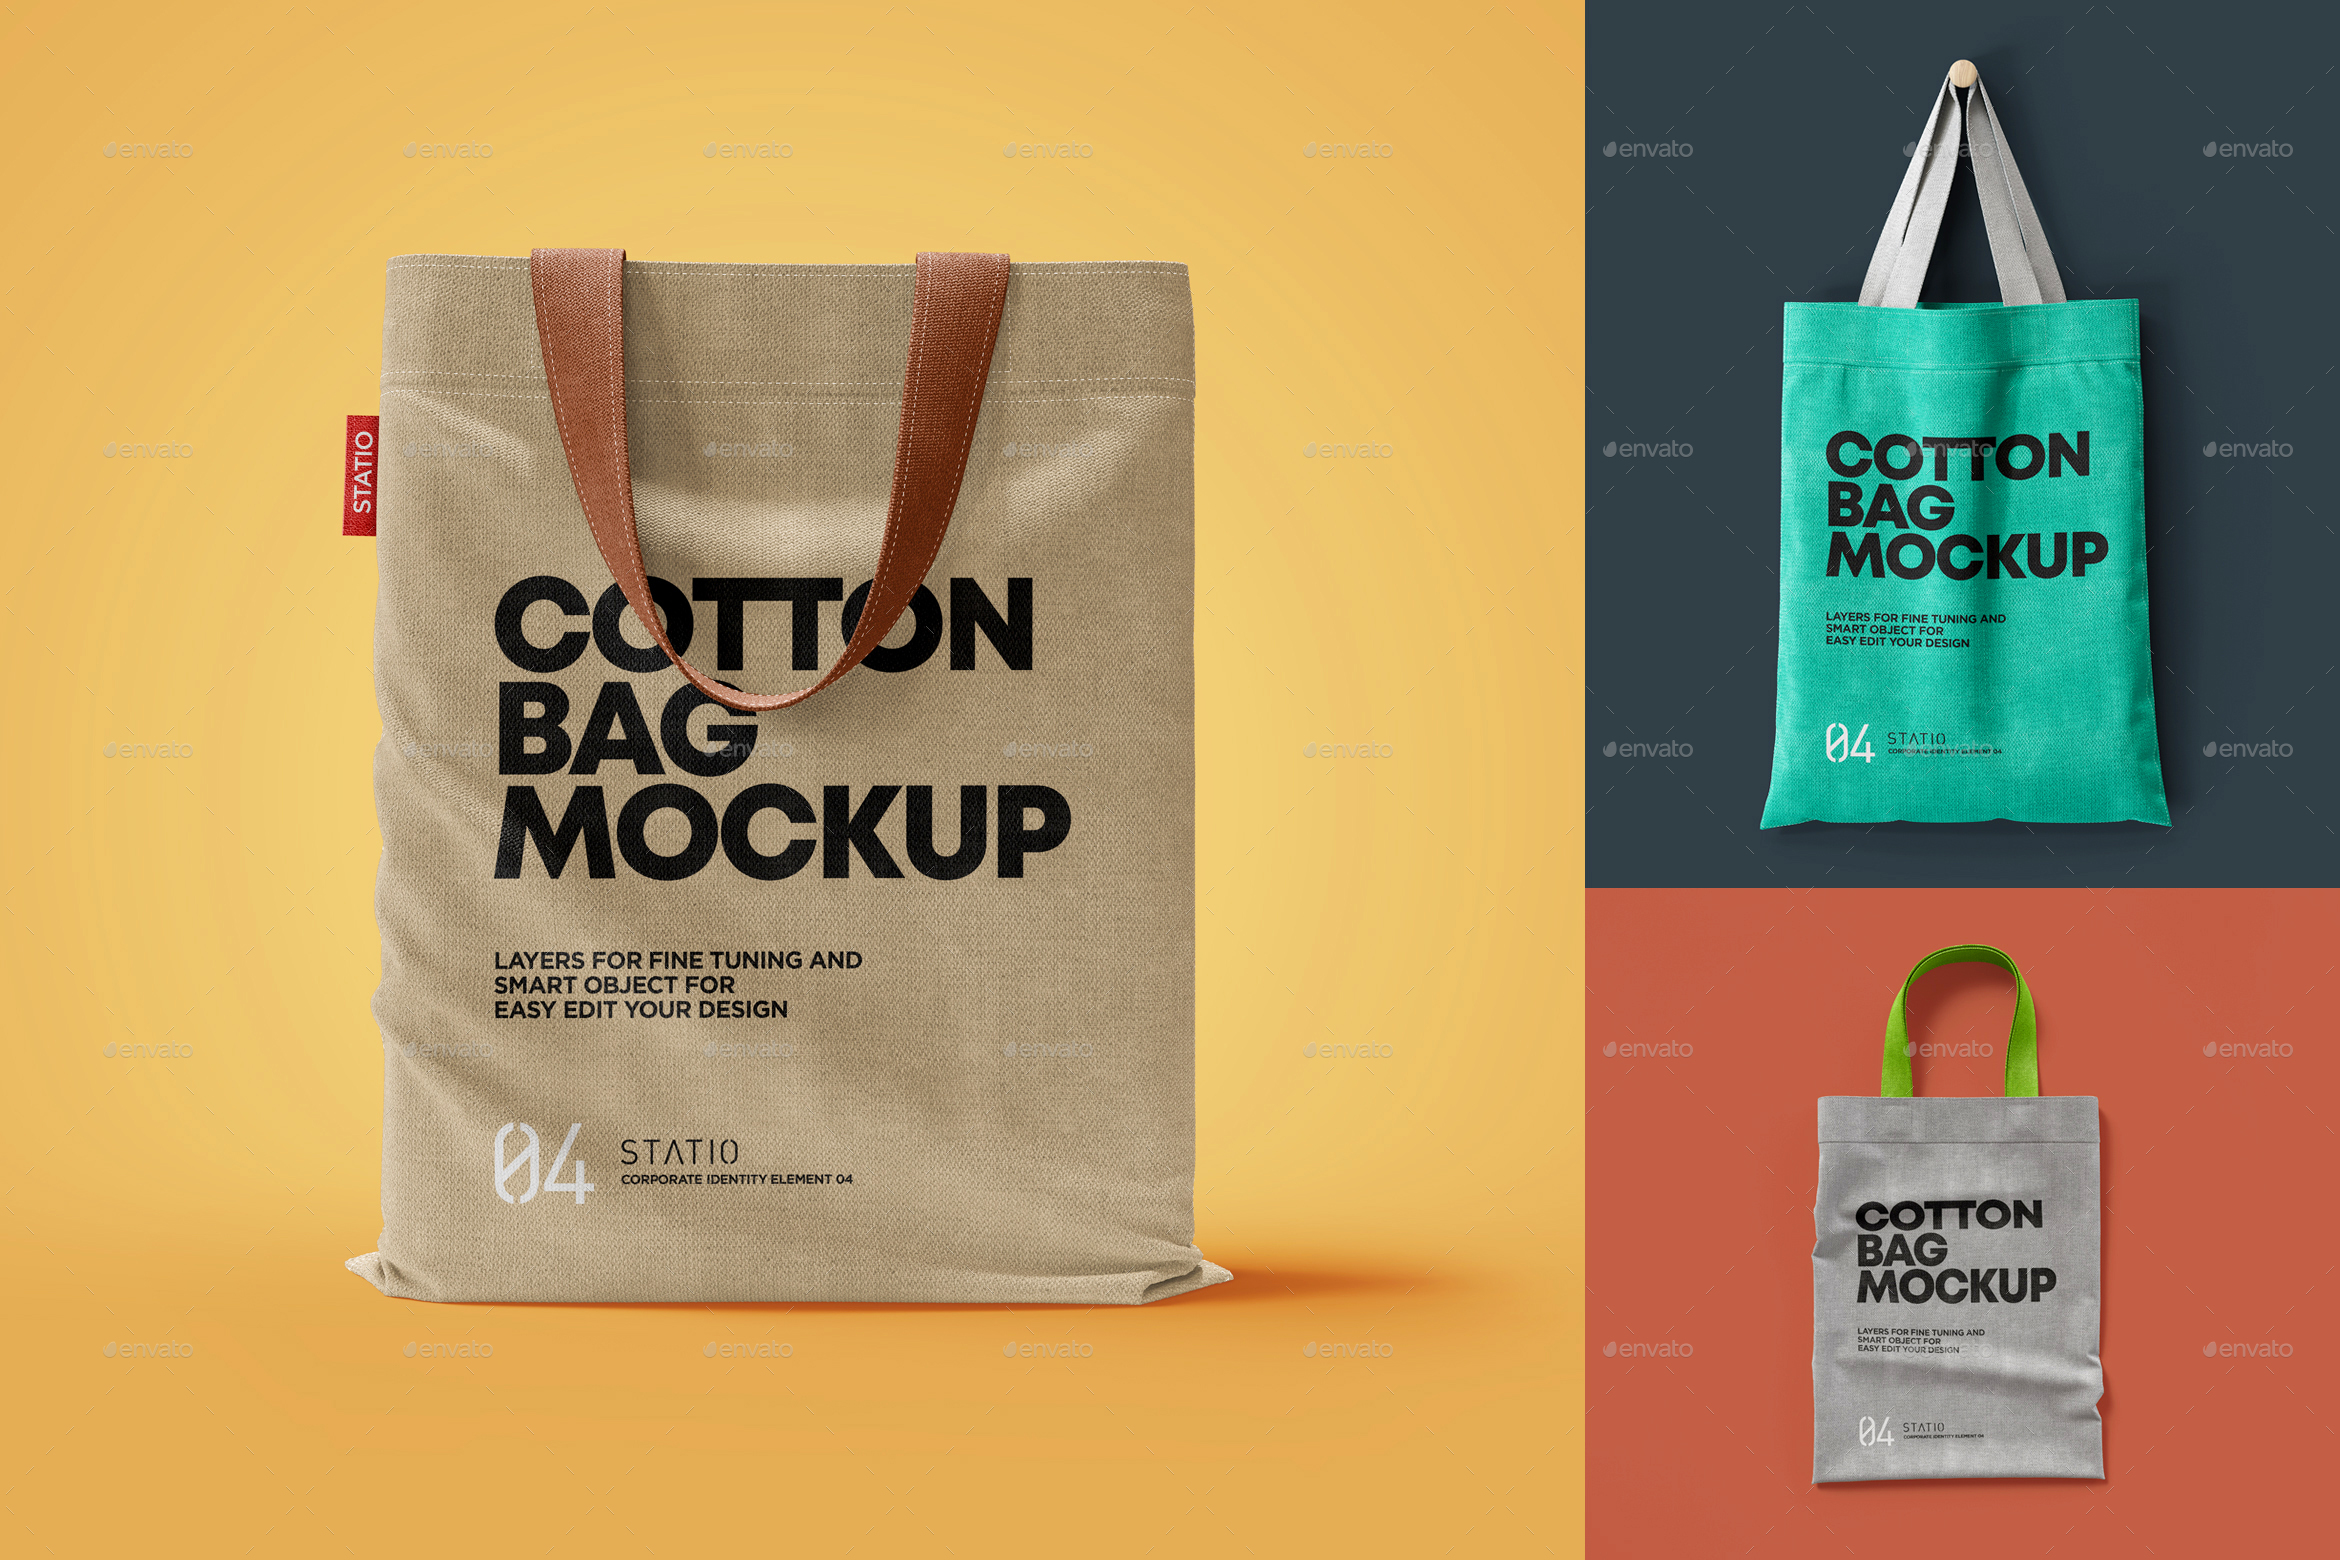 Cotton Bag Mockup: Statio pack by TIT0 | GraphicRiver